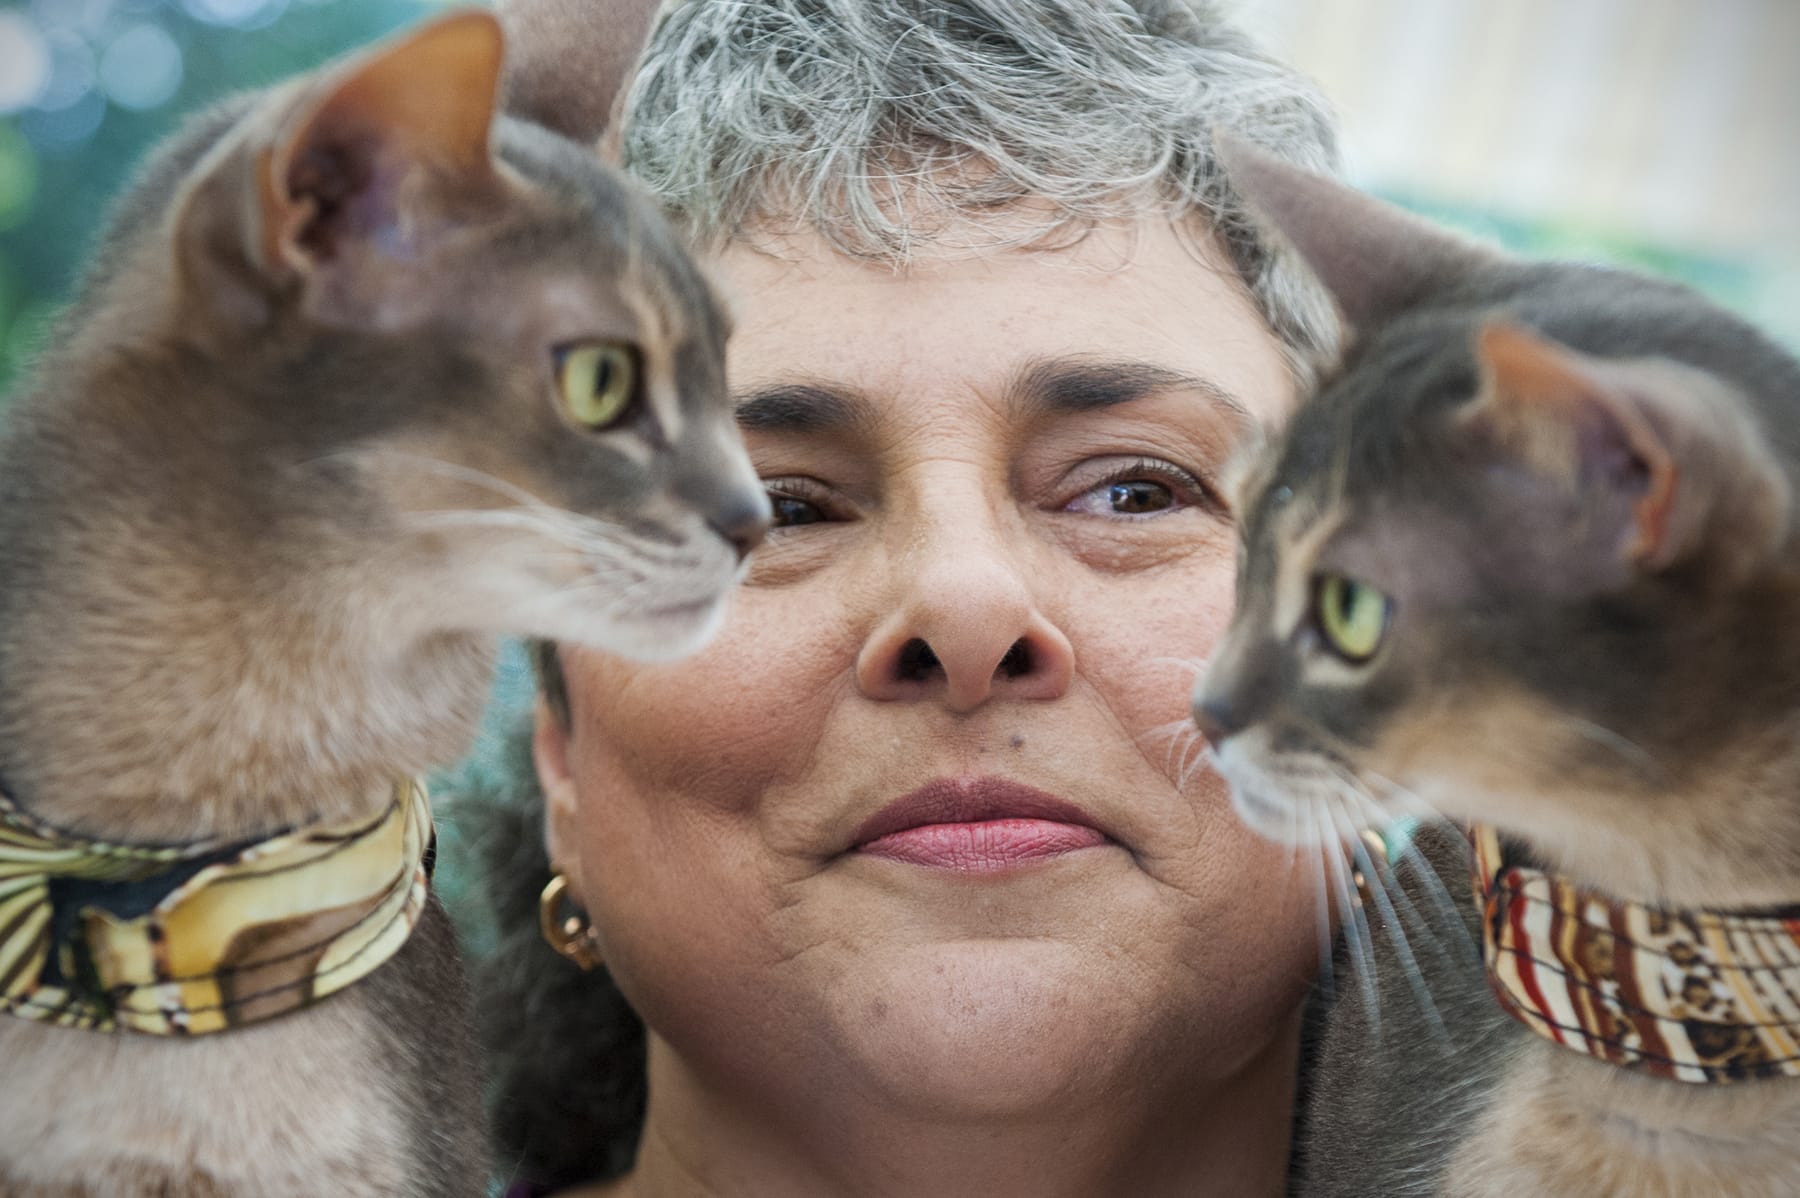 Katherine Frey/The Washington Post
Cat lover Maria Padilla, center, is shown with mother-daughter duo Twyla, left, and Racy Mooner, on Sept. 3 in Reston, Va. Padilla says cats can do anything dogs can do.